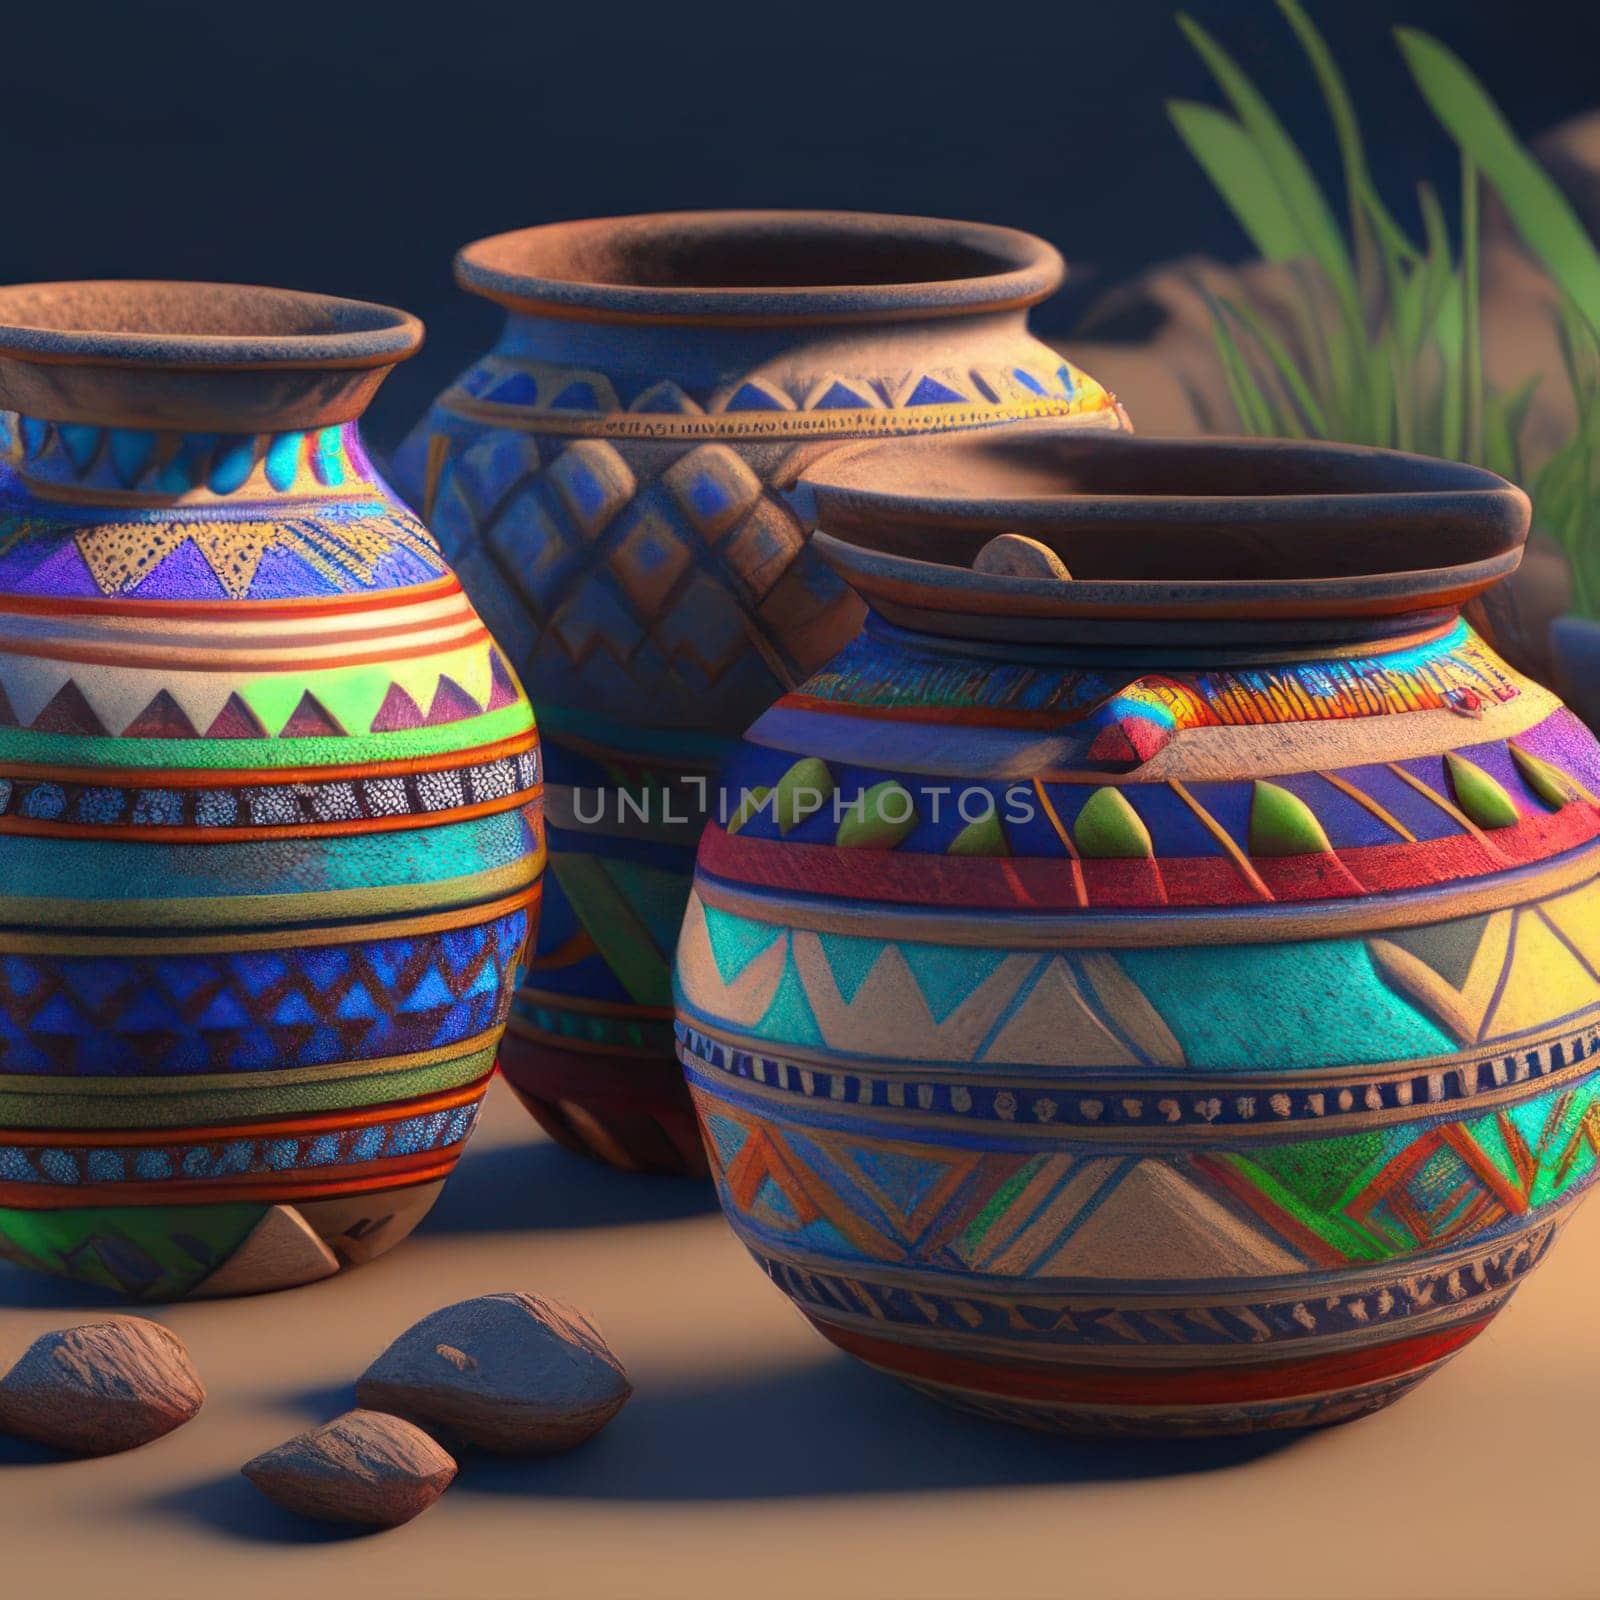 clay pots. Image created by AI